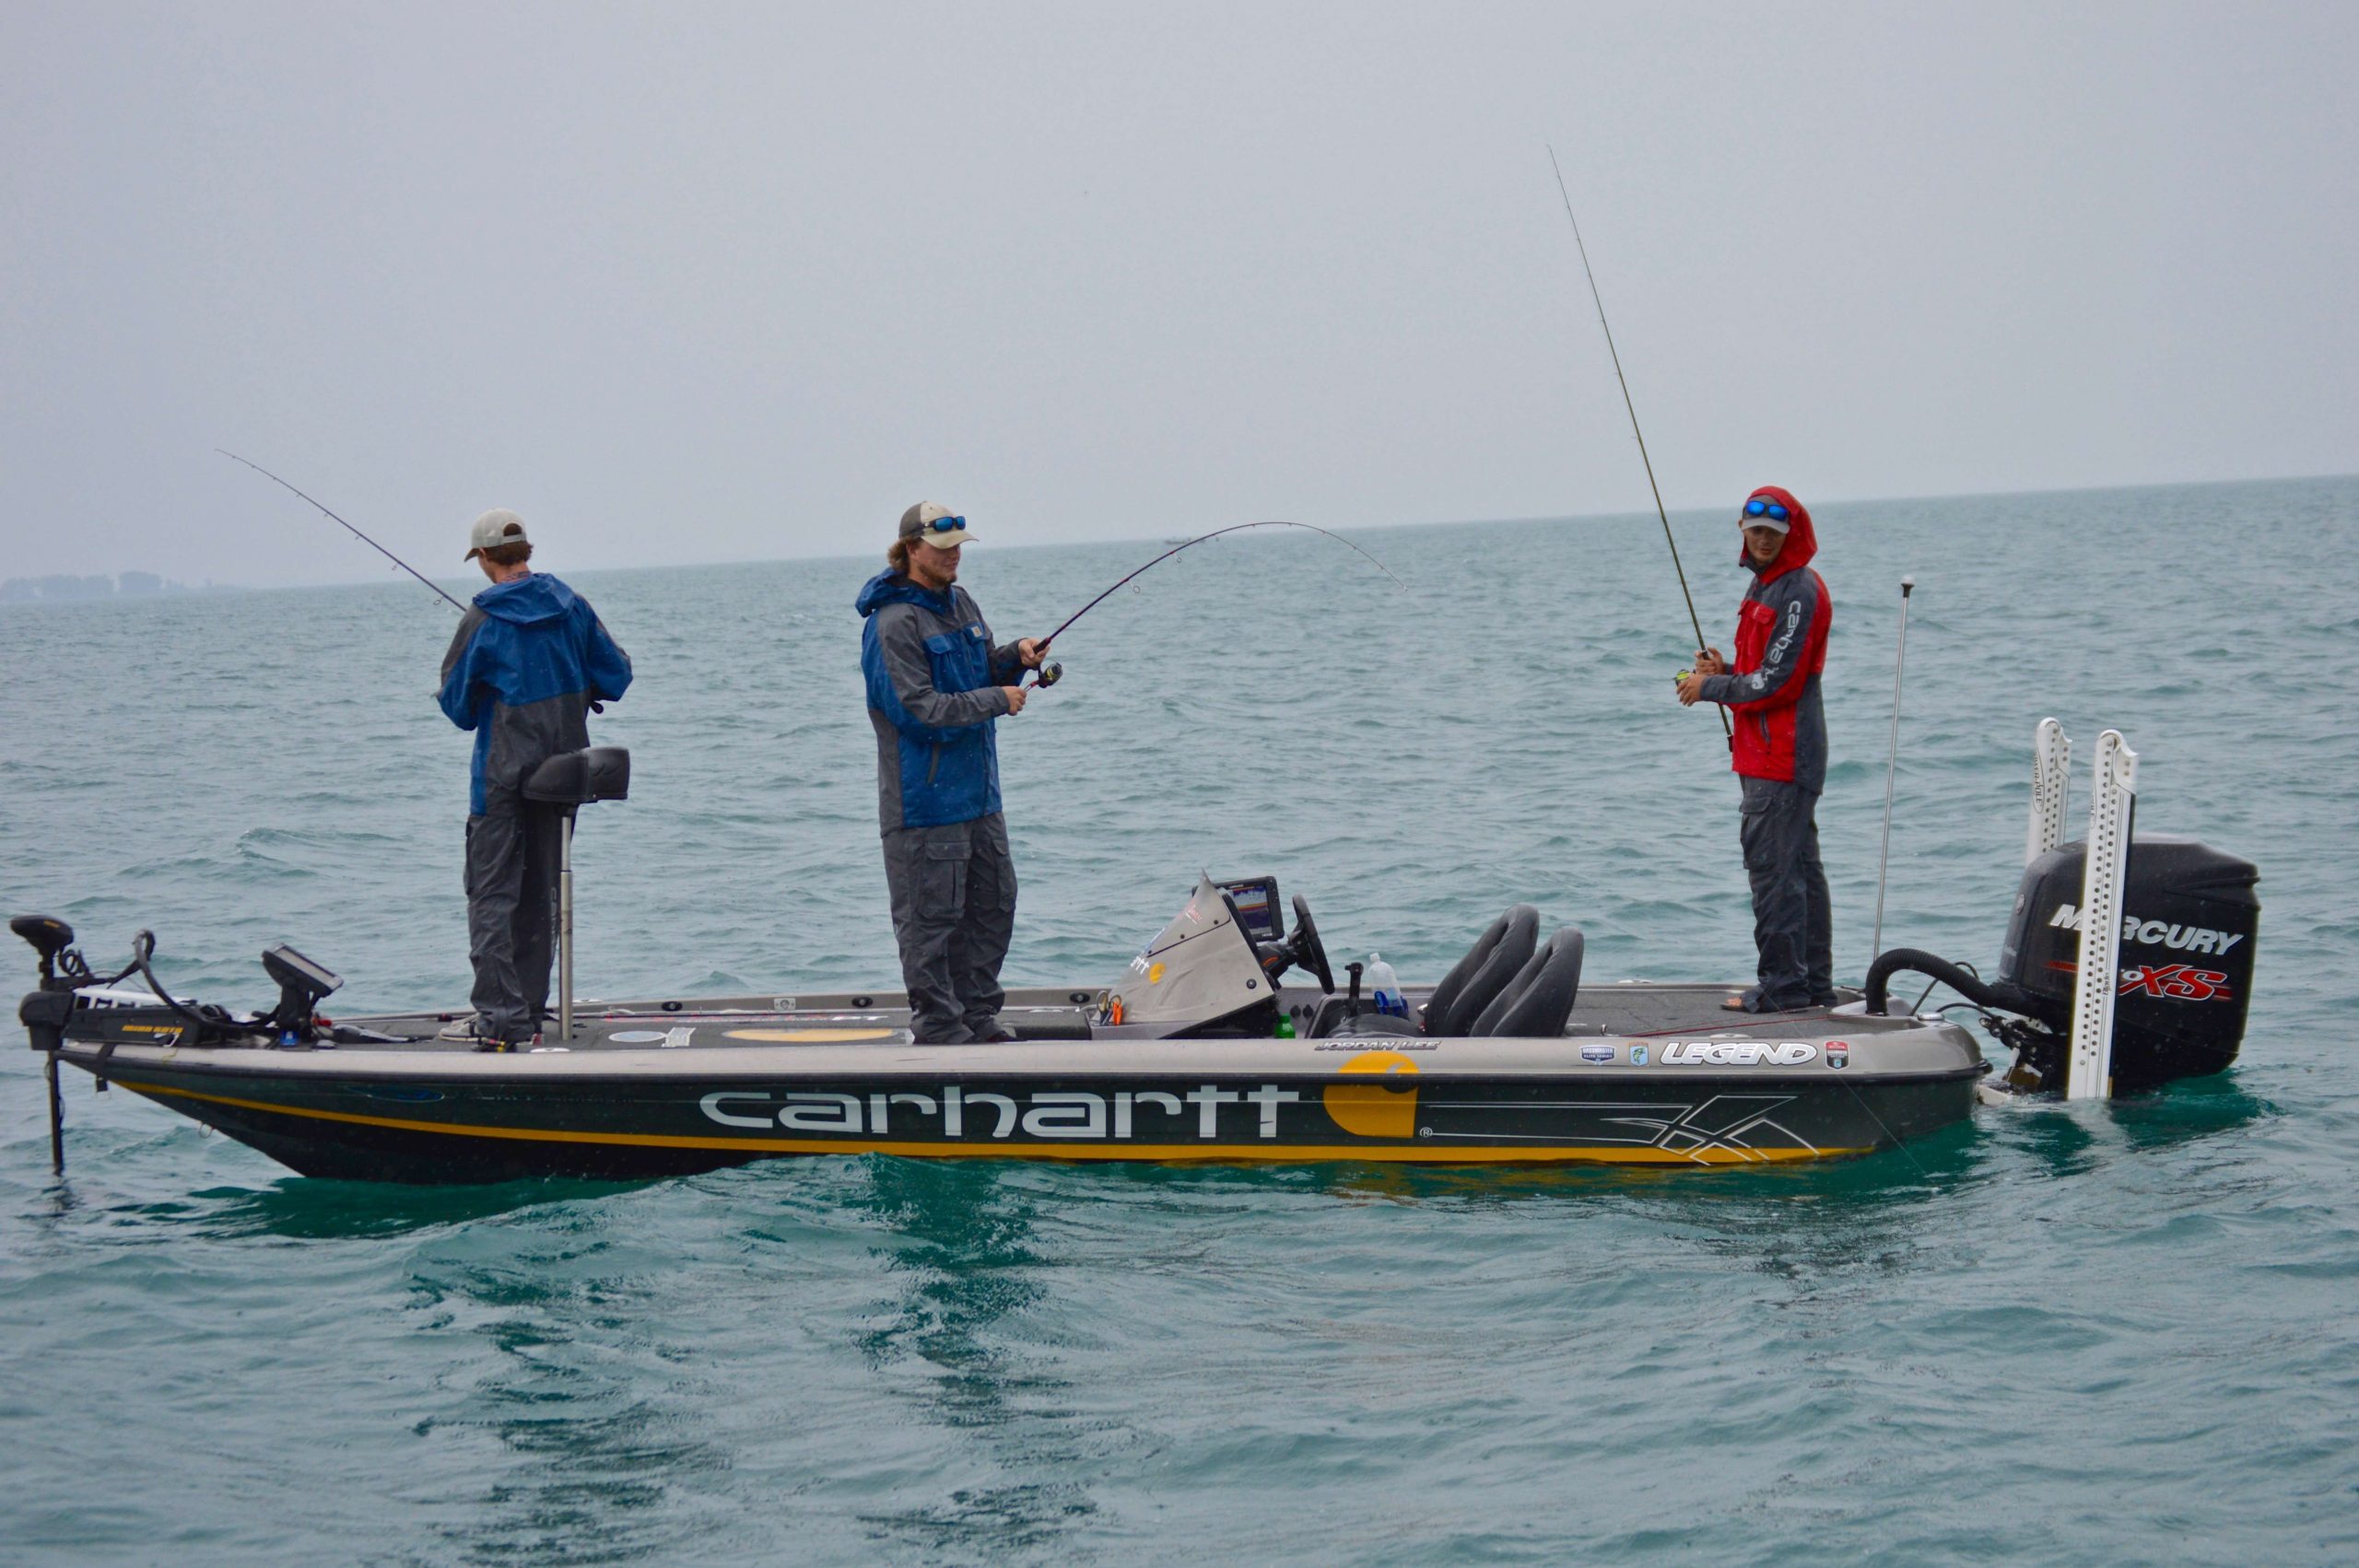 After the move a light rain started. The anglers threw on their Carhartt rain suits and stayed focus. Smith kept the hot hand and hooked up again.
